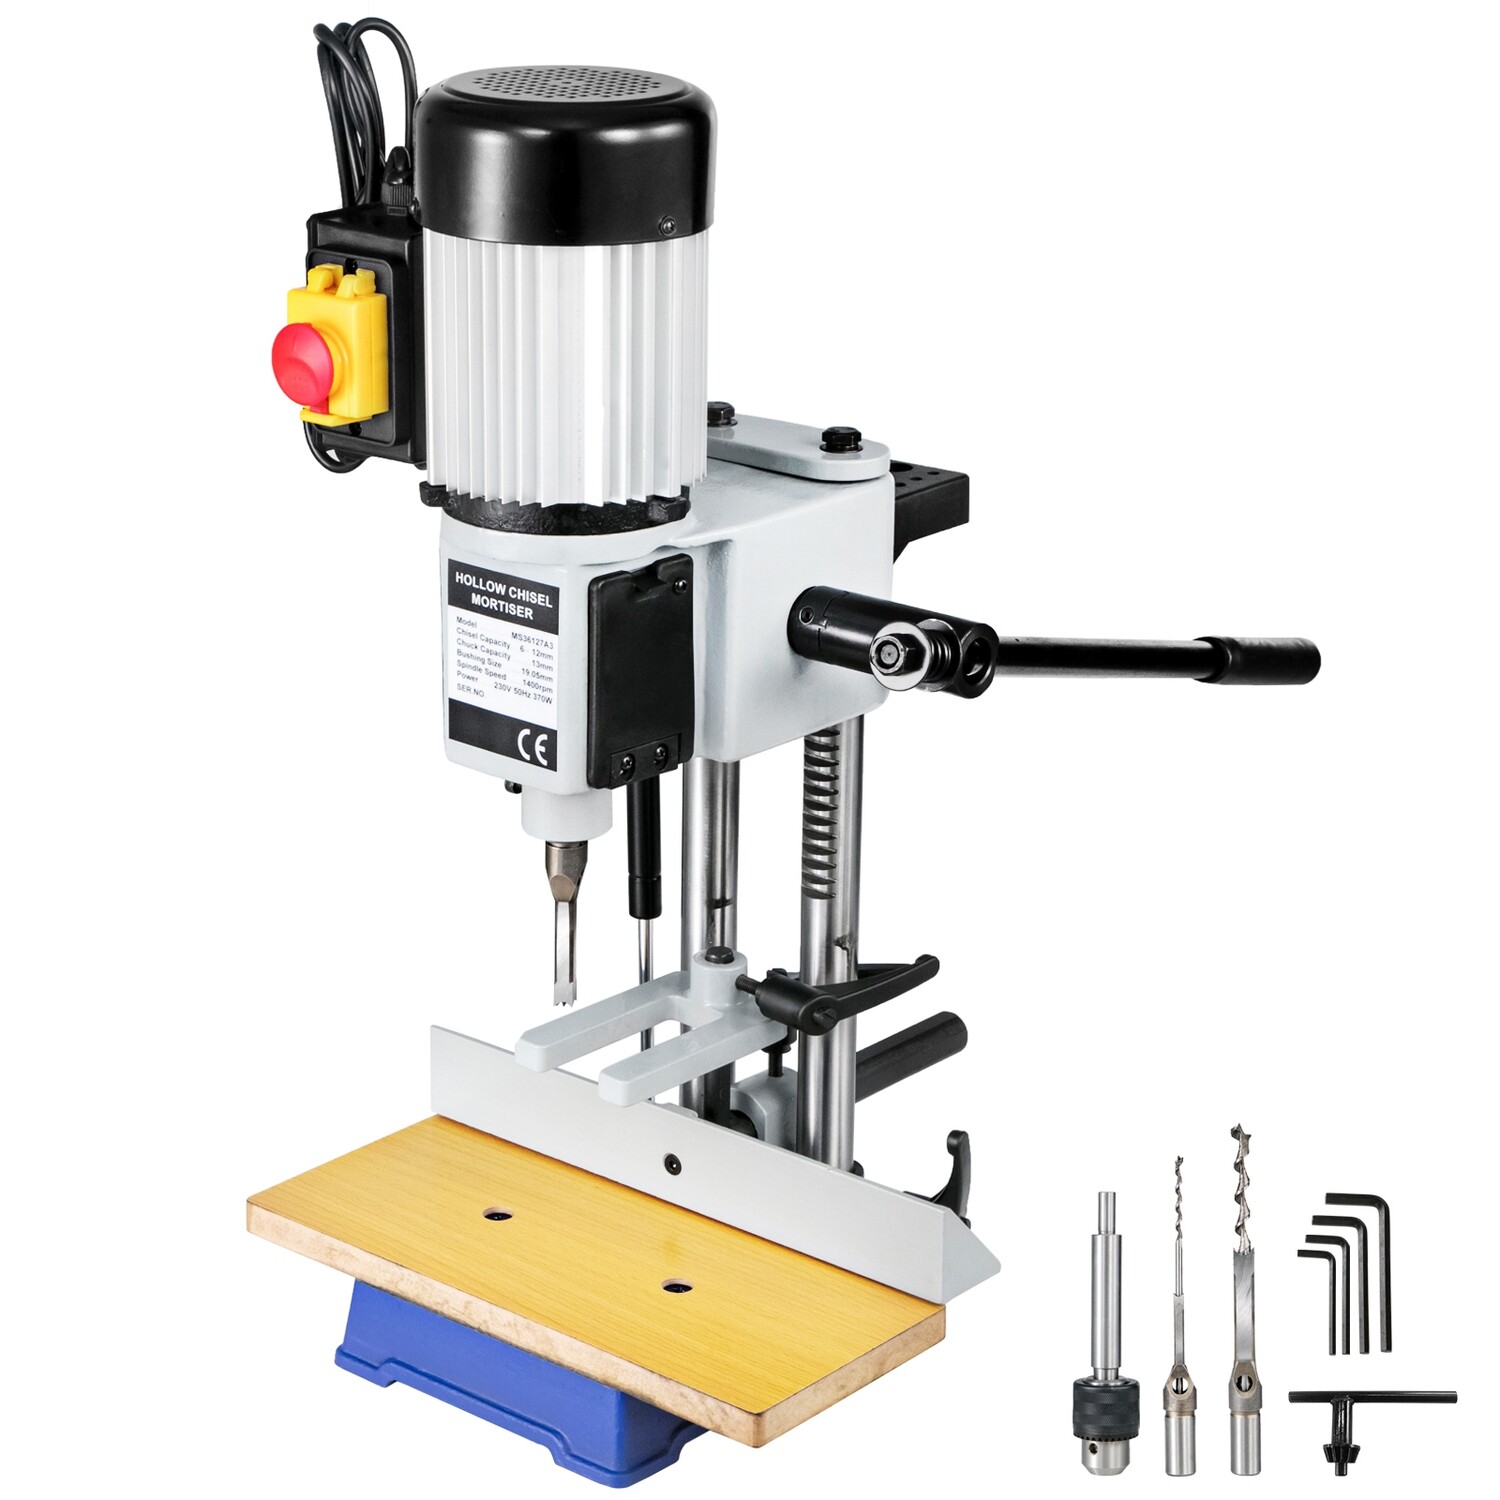 Mortise Hollow Machine With Chisel Bit Set For Woodworking